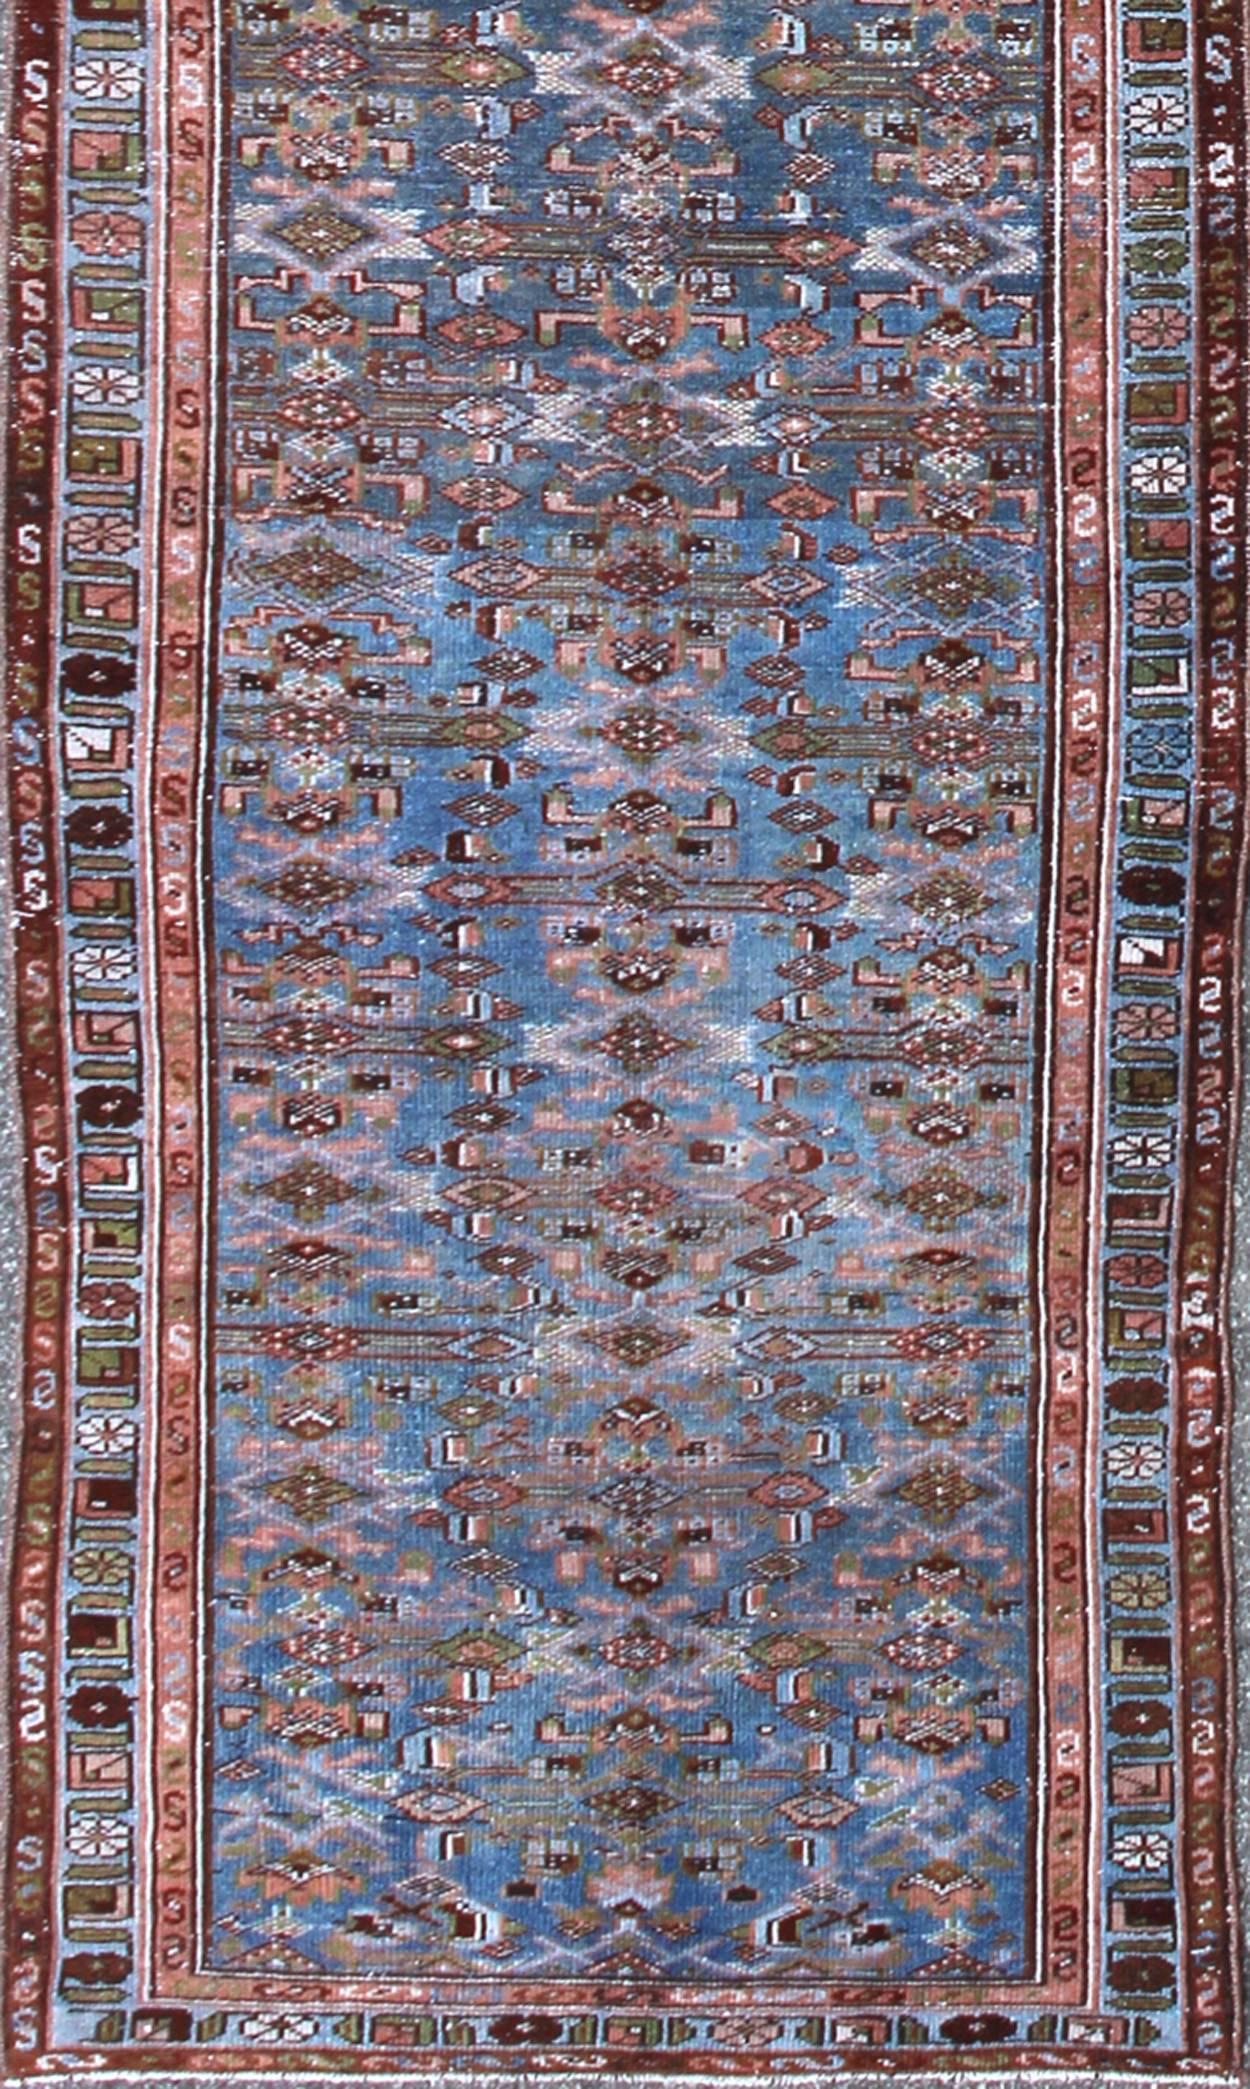 This antique Kurdish tribal runner was woven by Kurdish weavers in western Persia in the early 20th century. Often they used this repeating latch-hook design in the border, woven along in varying colored panels. The emphasis with these rugs is on